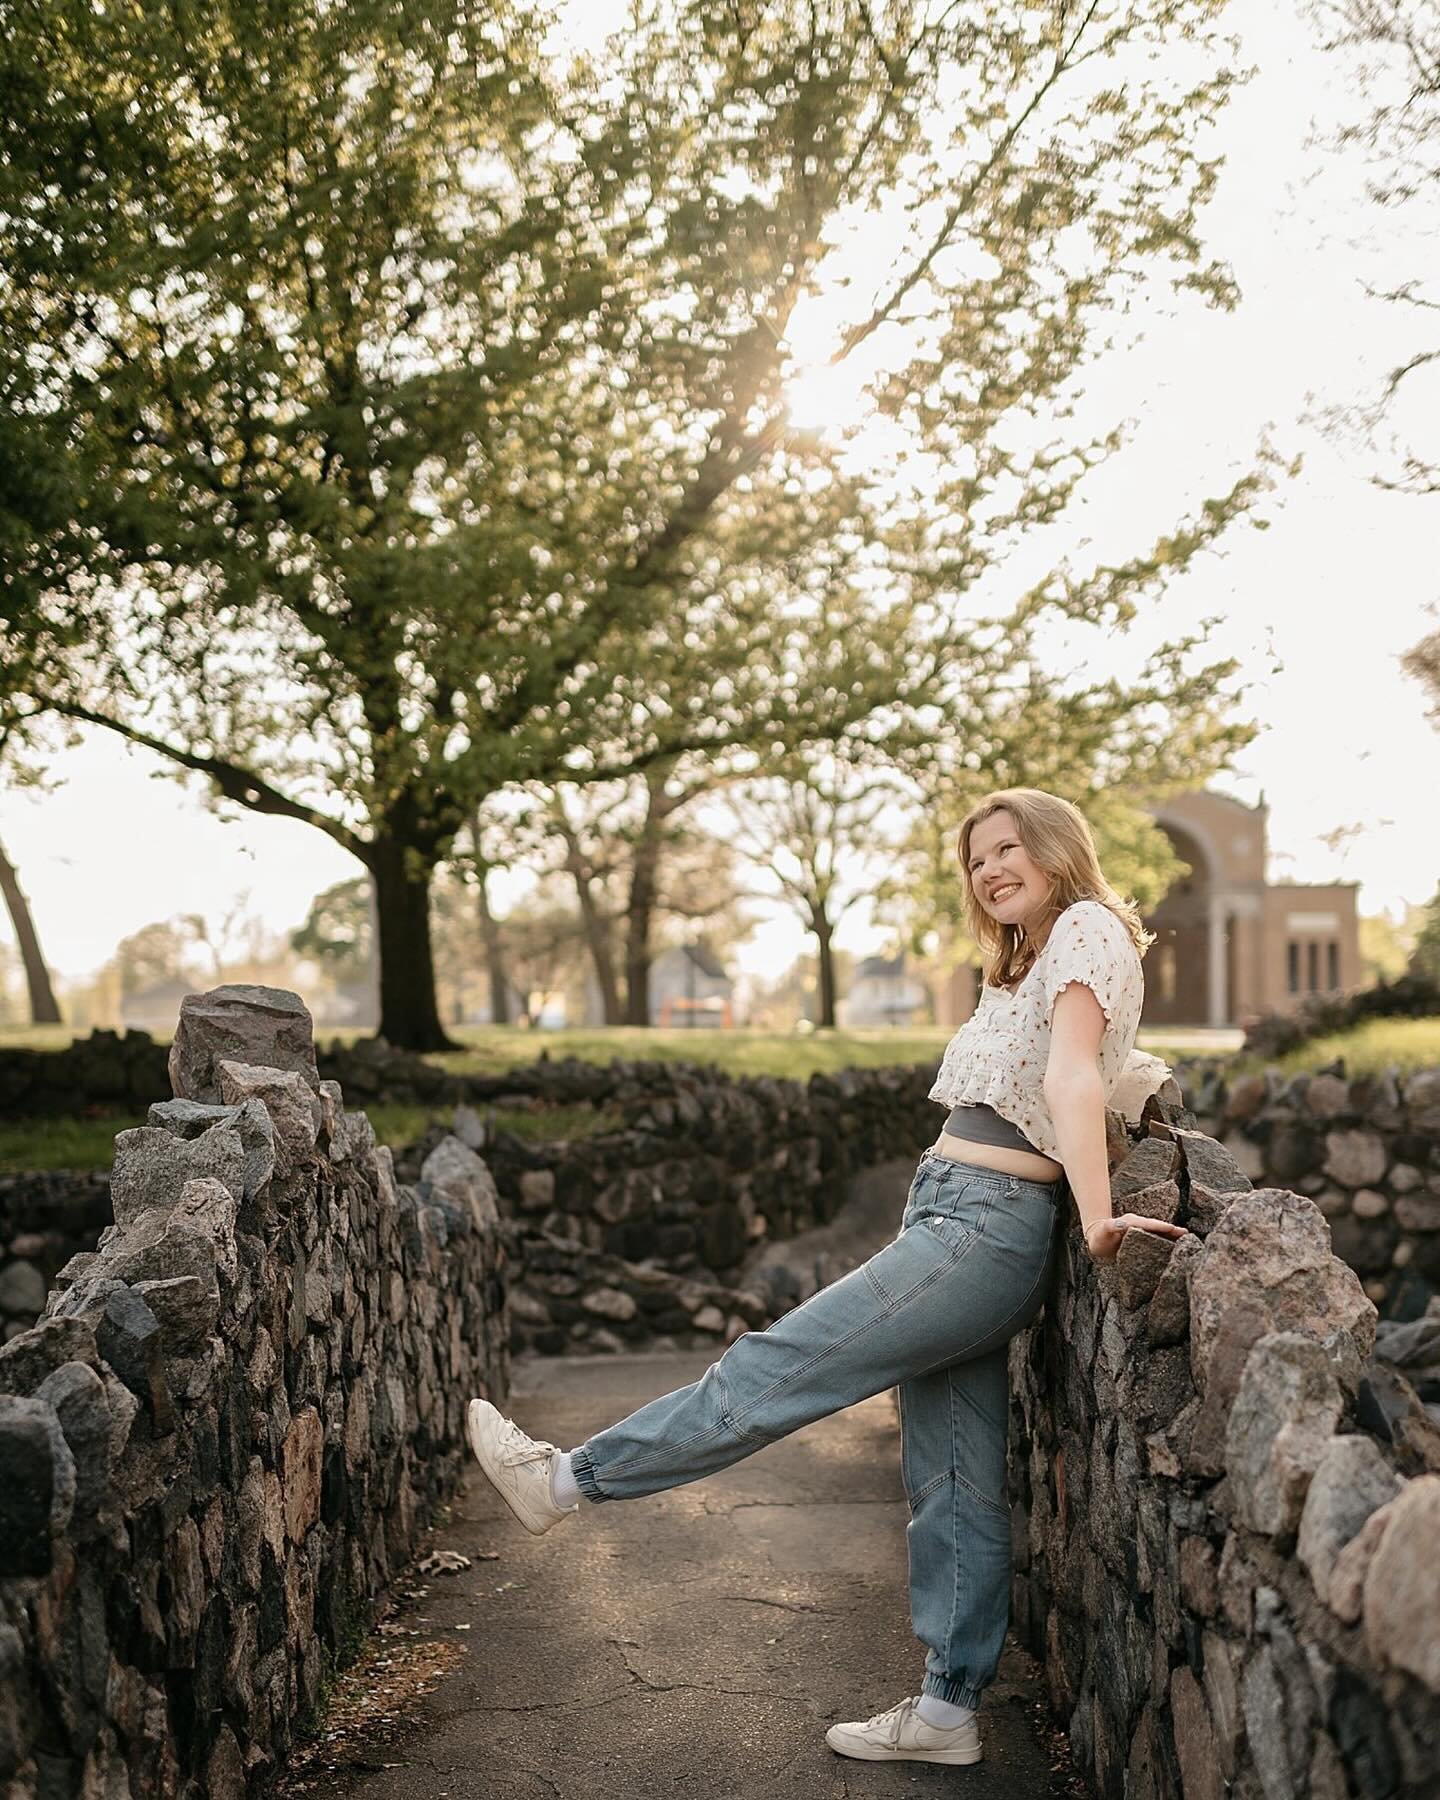 In between college grad sessions, I&rsquo;ve been meeting some wonderful high school seniors too! ❤️ Had so much fun roaming around Mishawaka, on a beautiful evening, with these sweet souls! 😊 Many congratulations Elena and Rondo! Go chase your drea